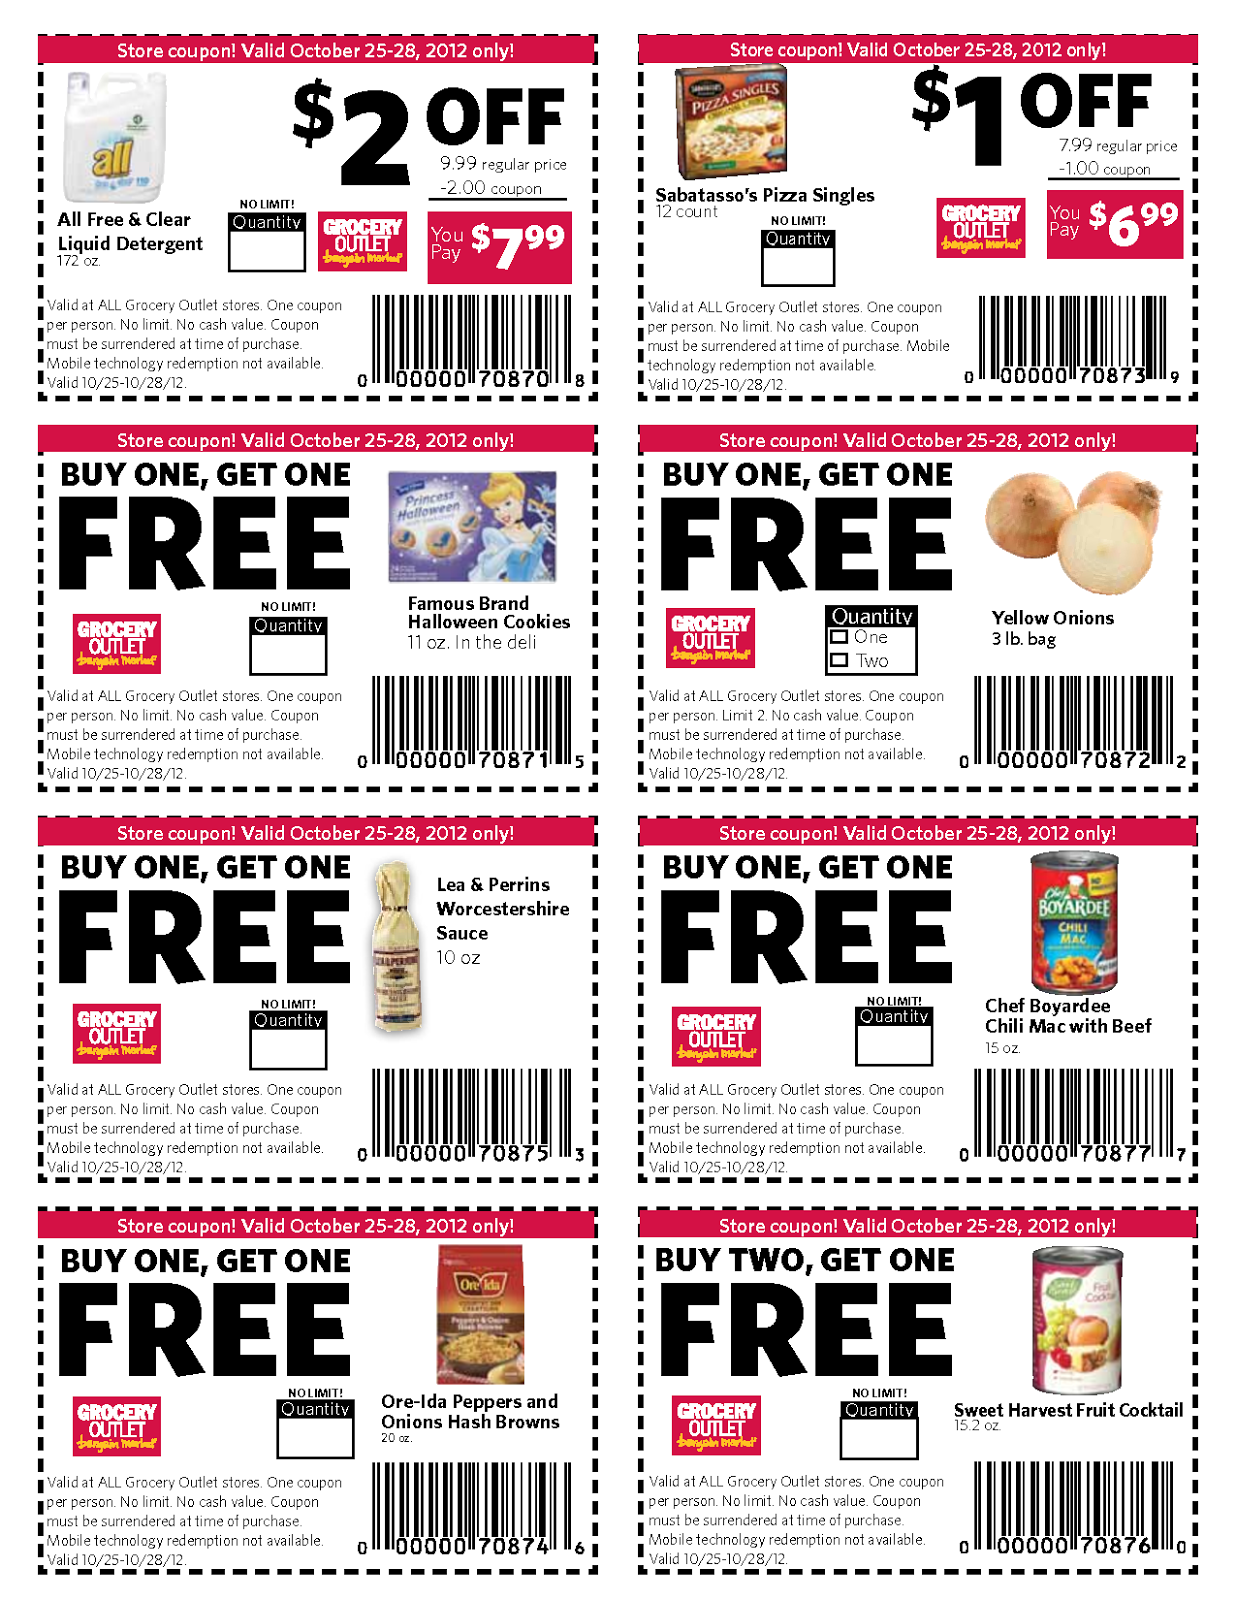 free-in-store-coupons-printable-printable-templates